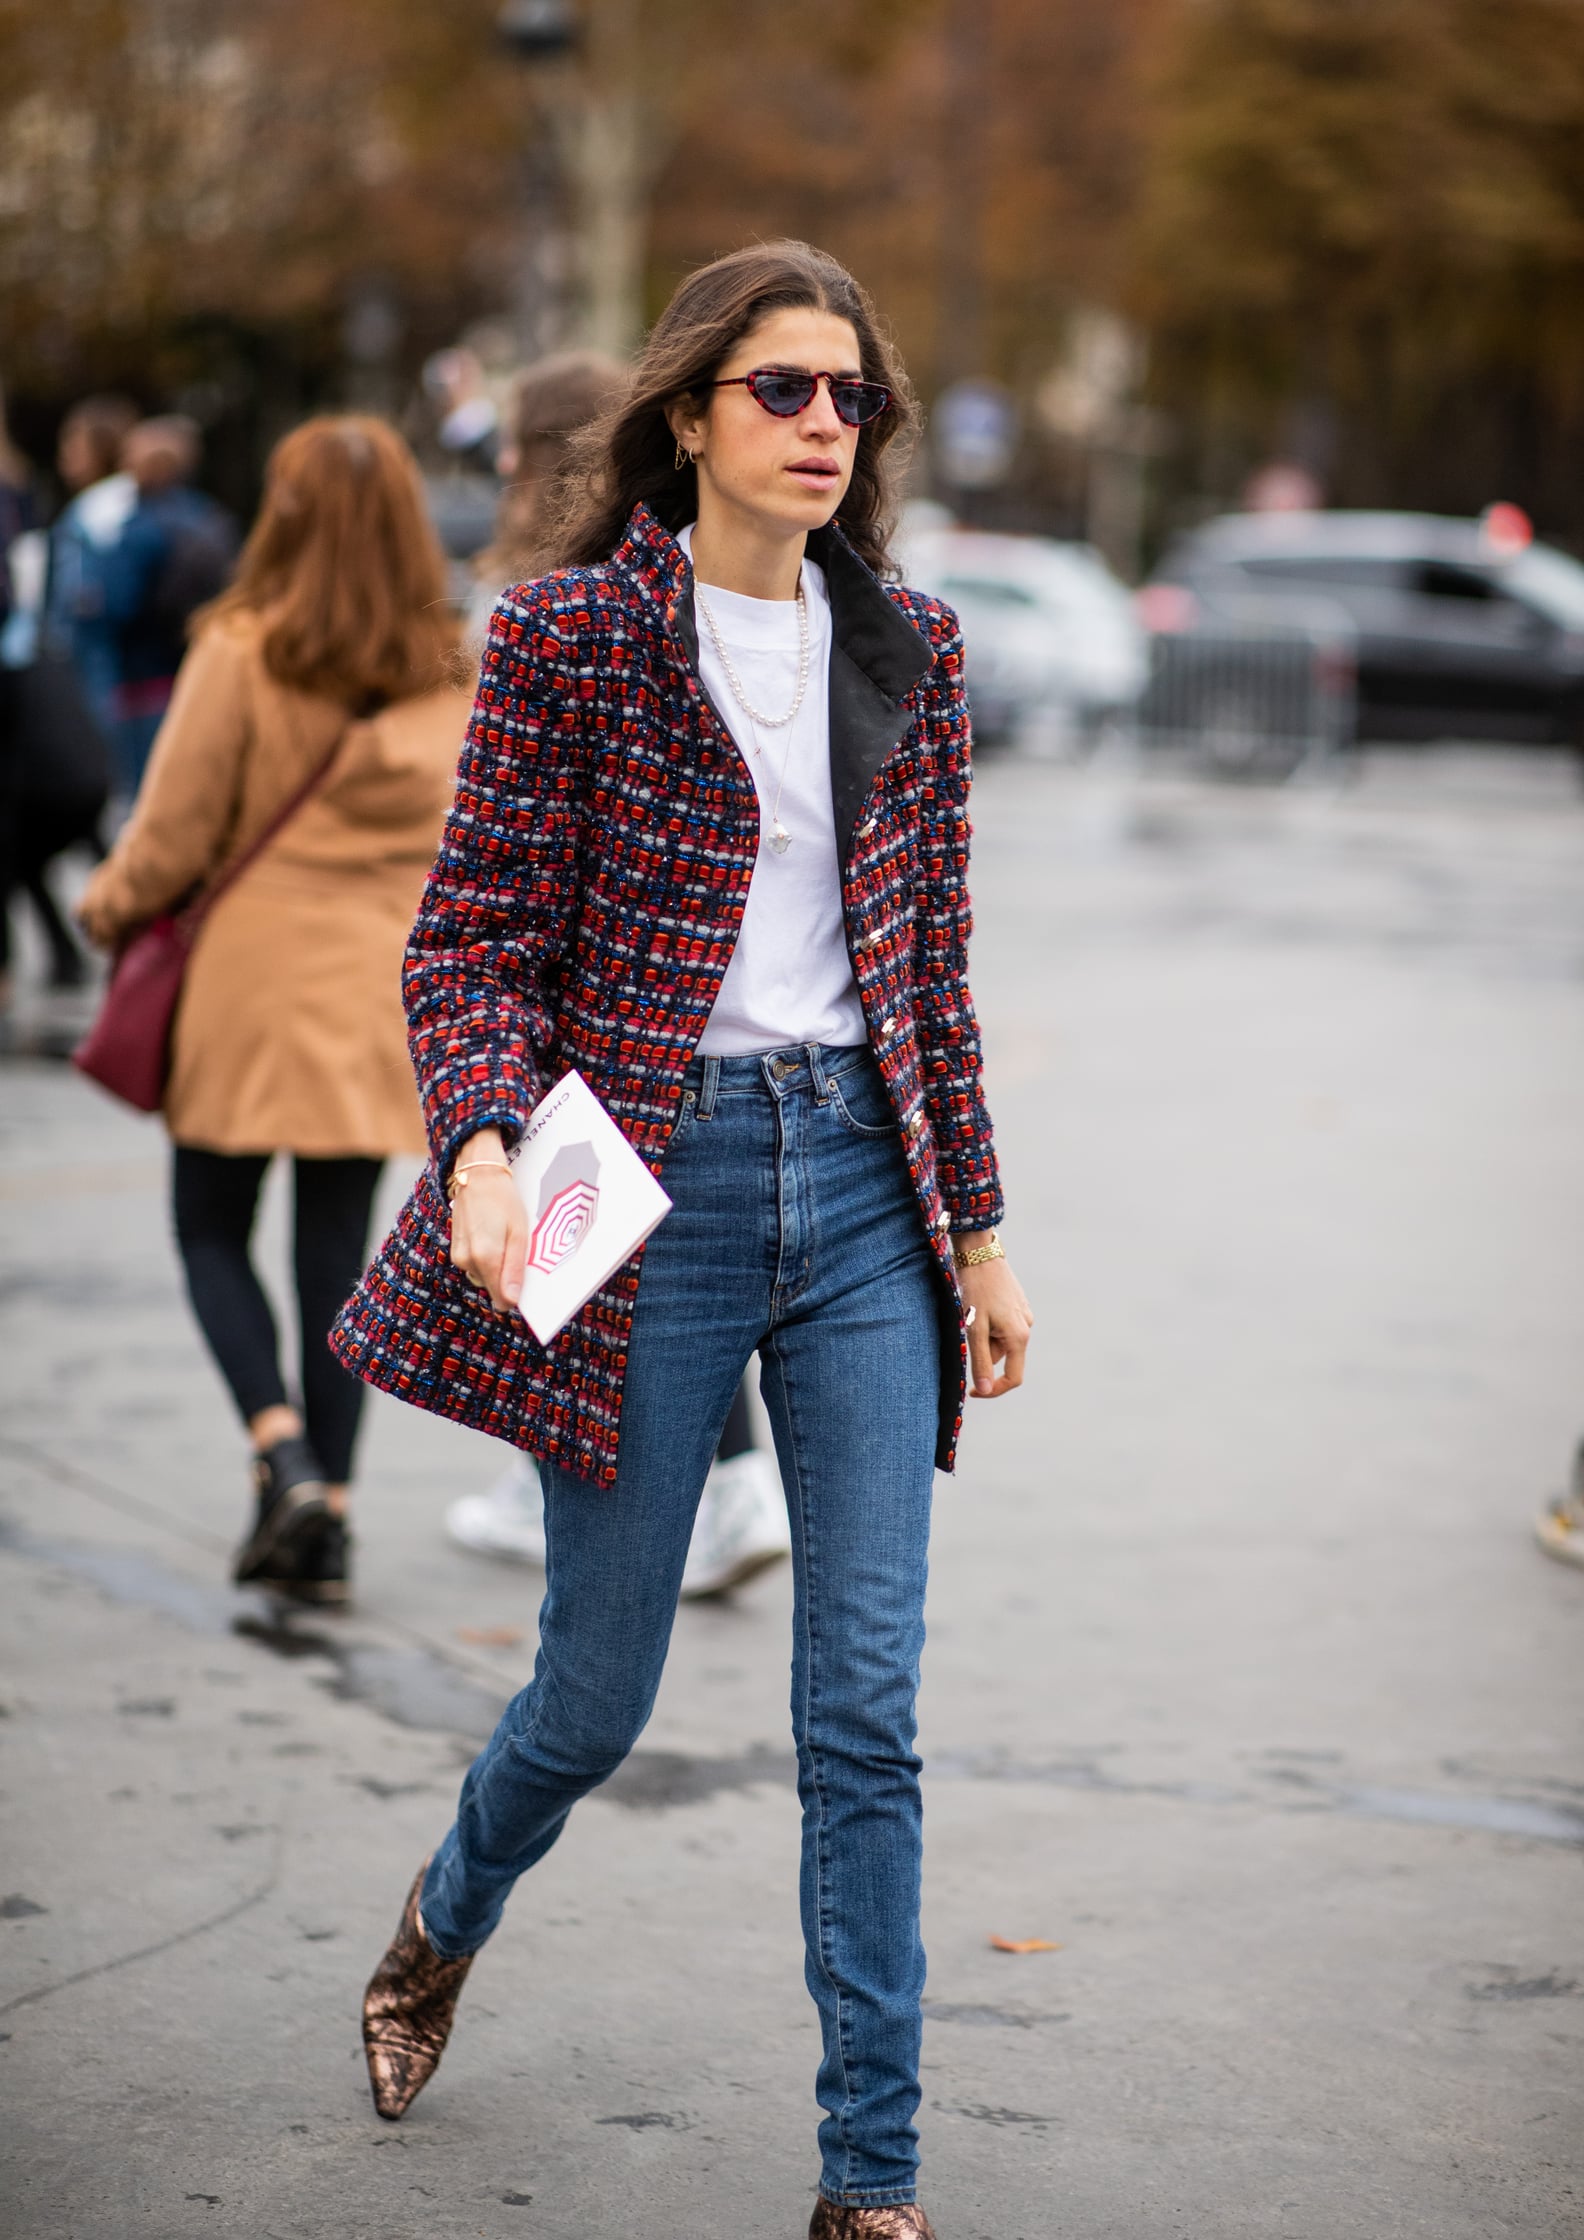 Cool Ways to Wear Colorful Outfits All Winter | POPSUGAR Fashion